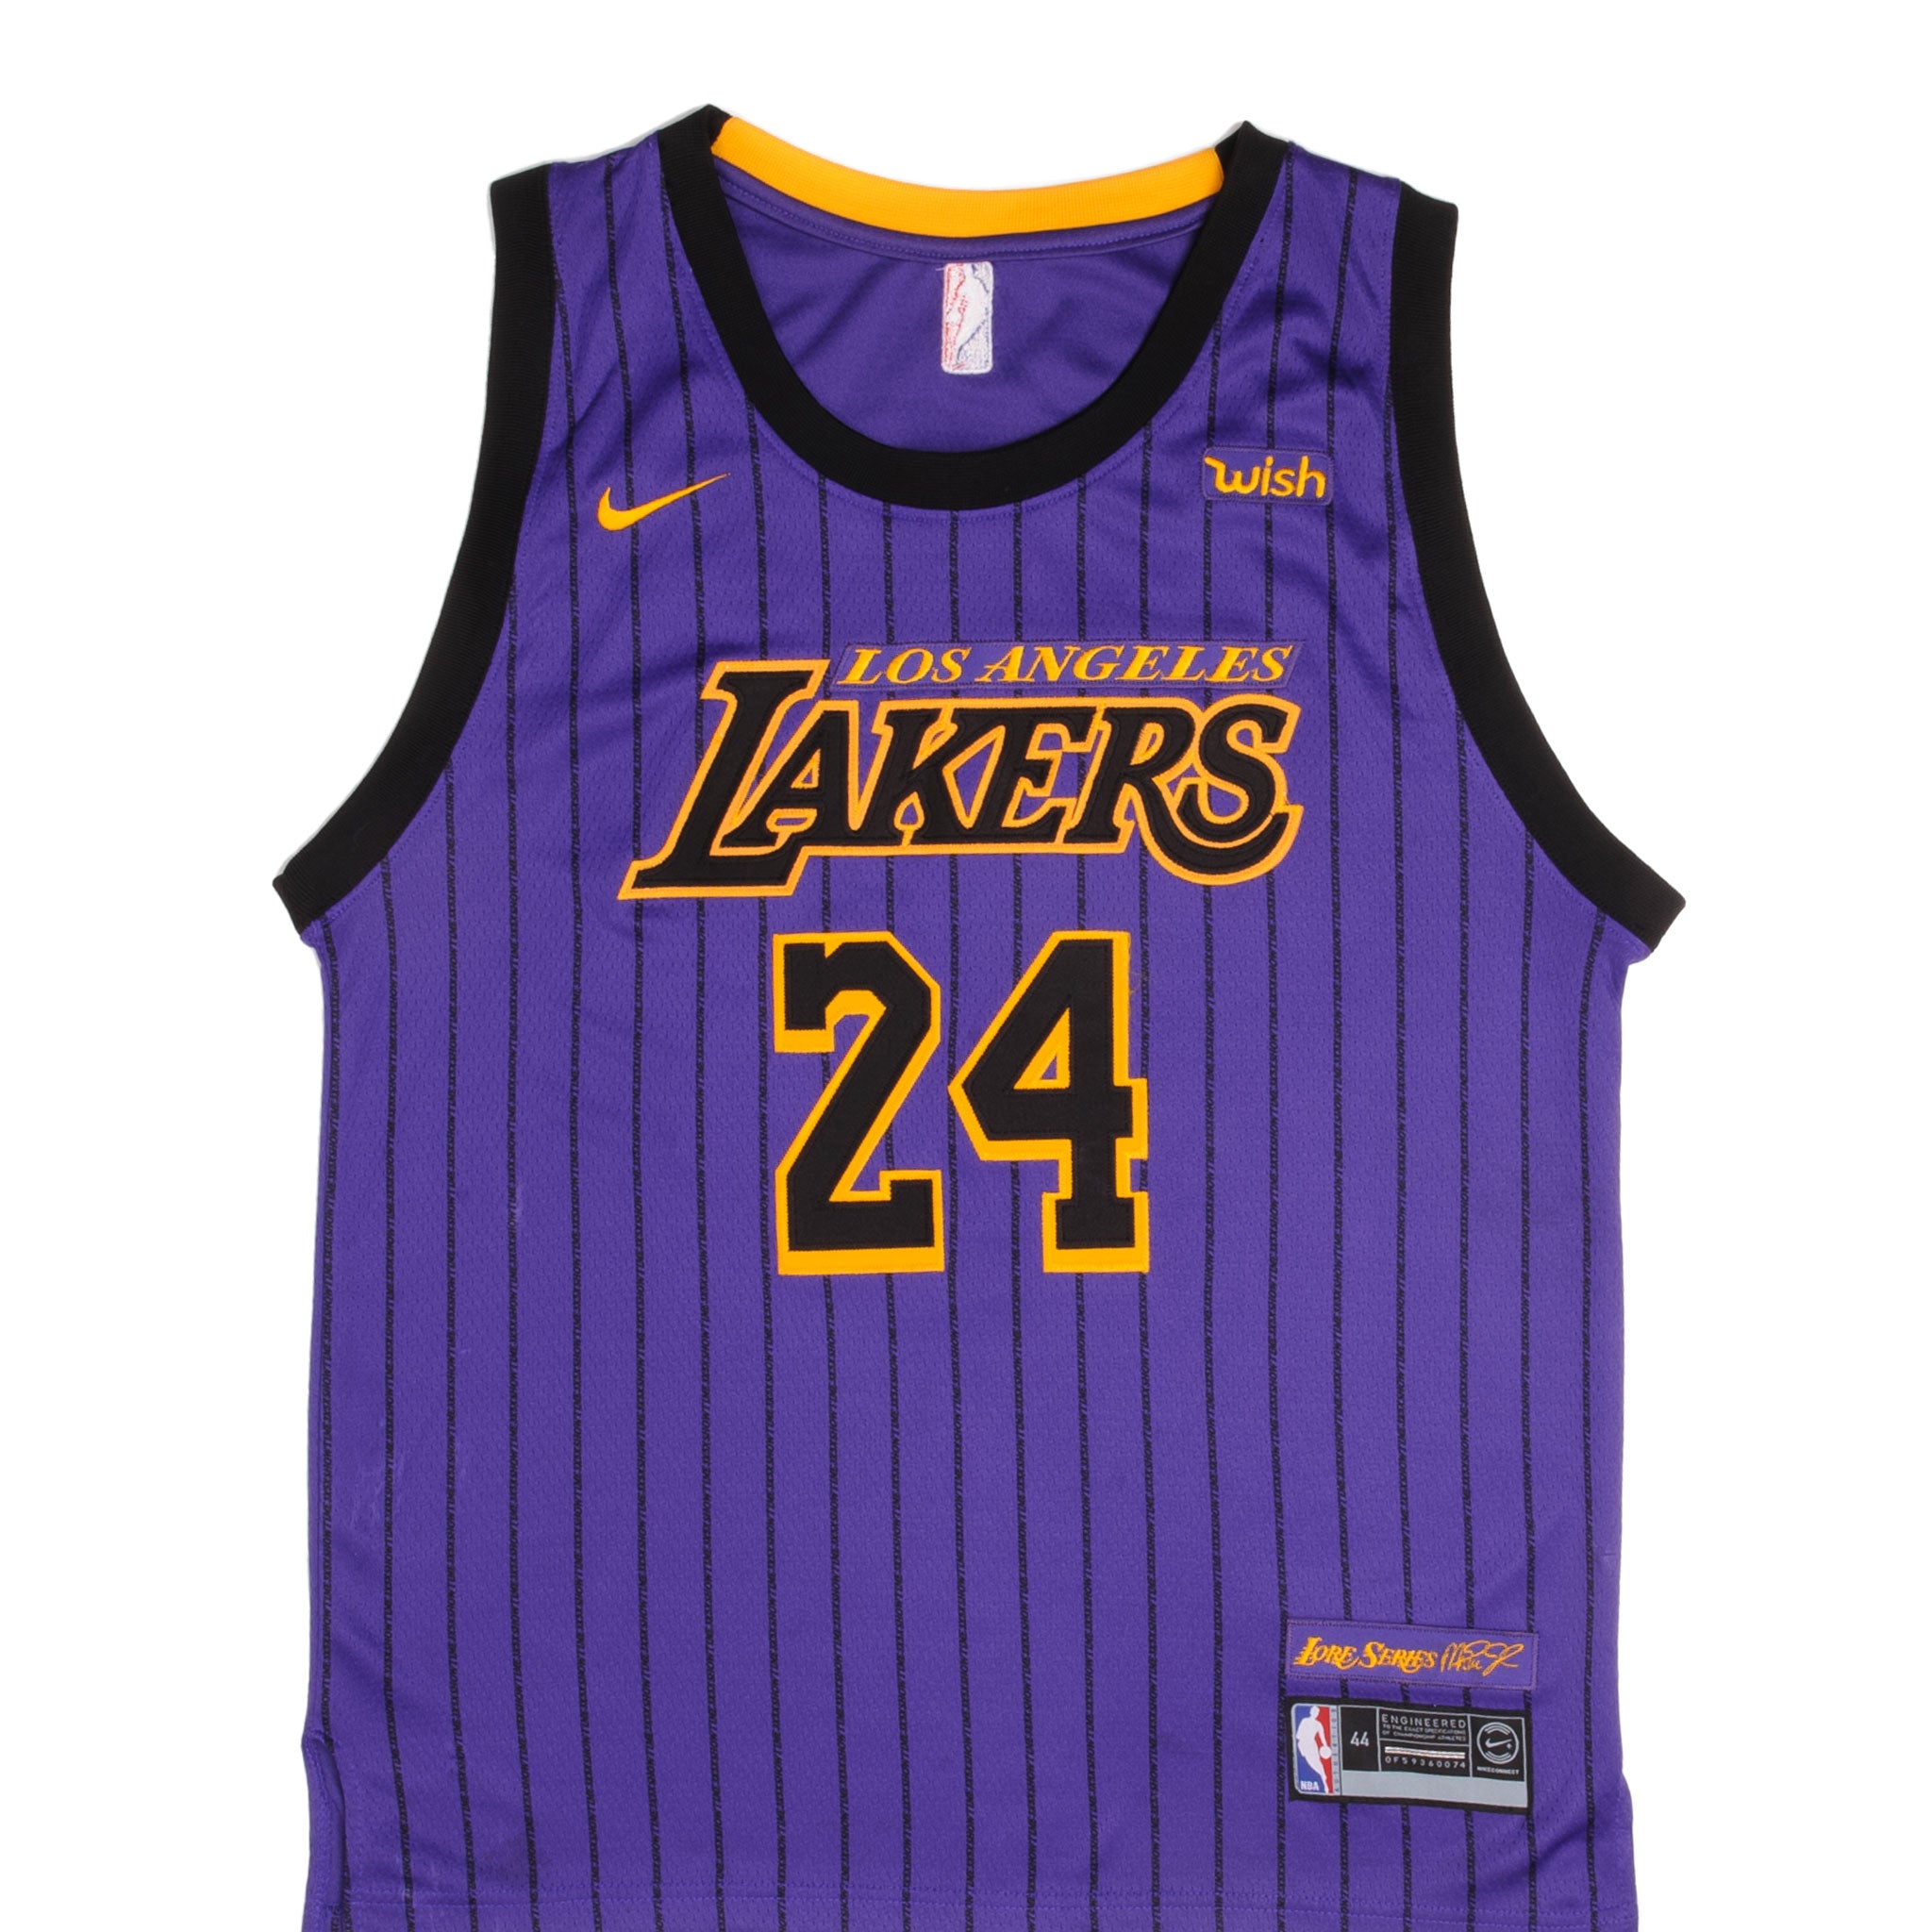 Outerwear - Los Angeles Lakers Throwback Apparel & Jerseys